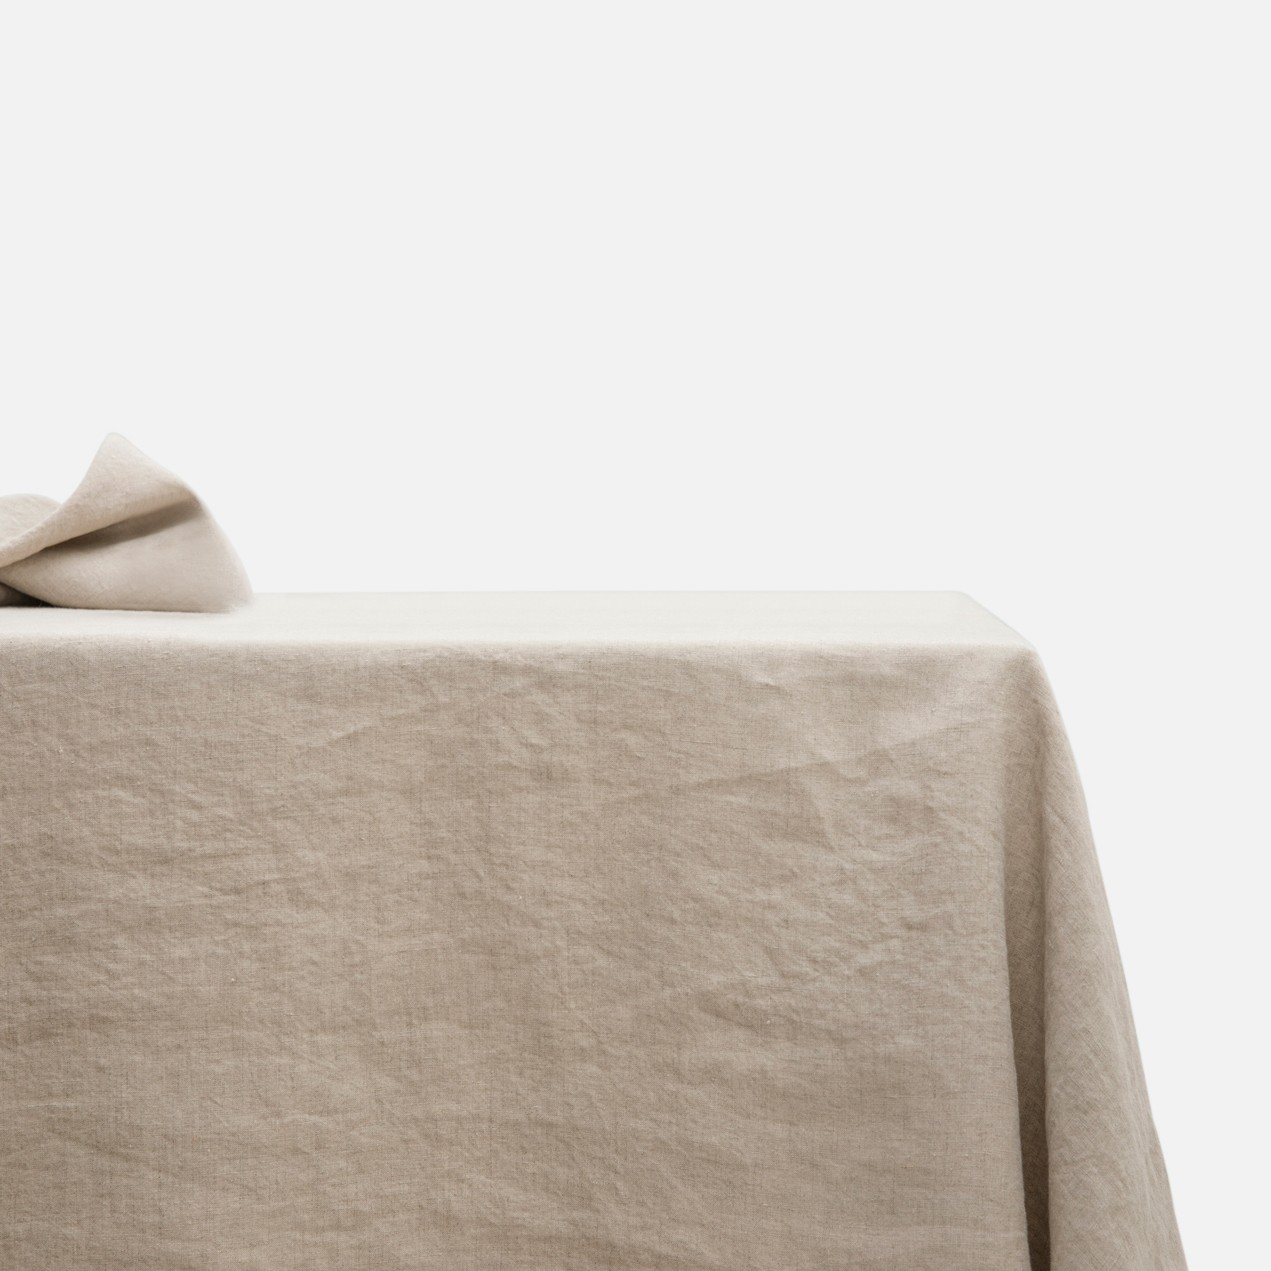 a table with a white cloth on top of it